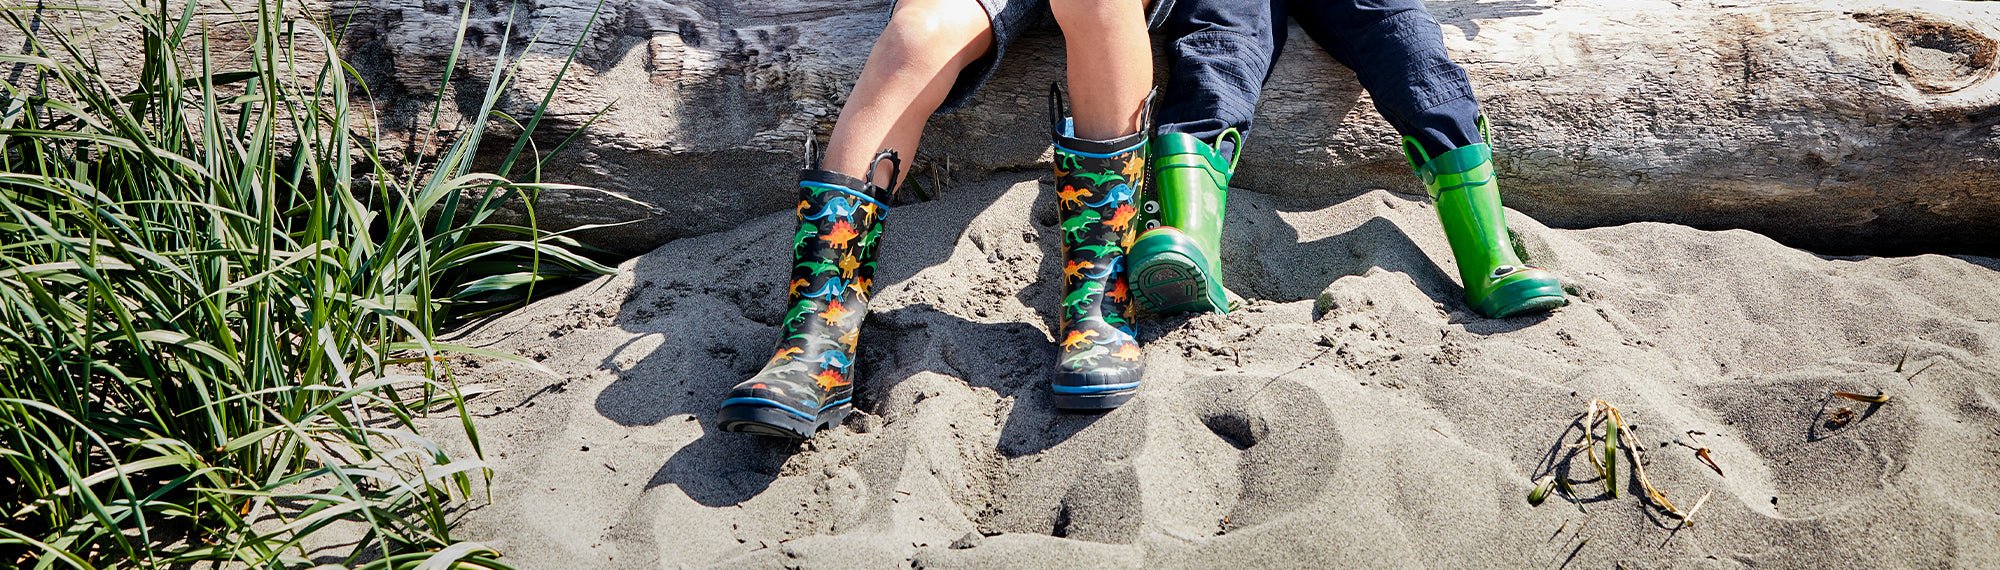 Western Chief | Rain Boots, Rain Coats, and Shoes for Kids